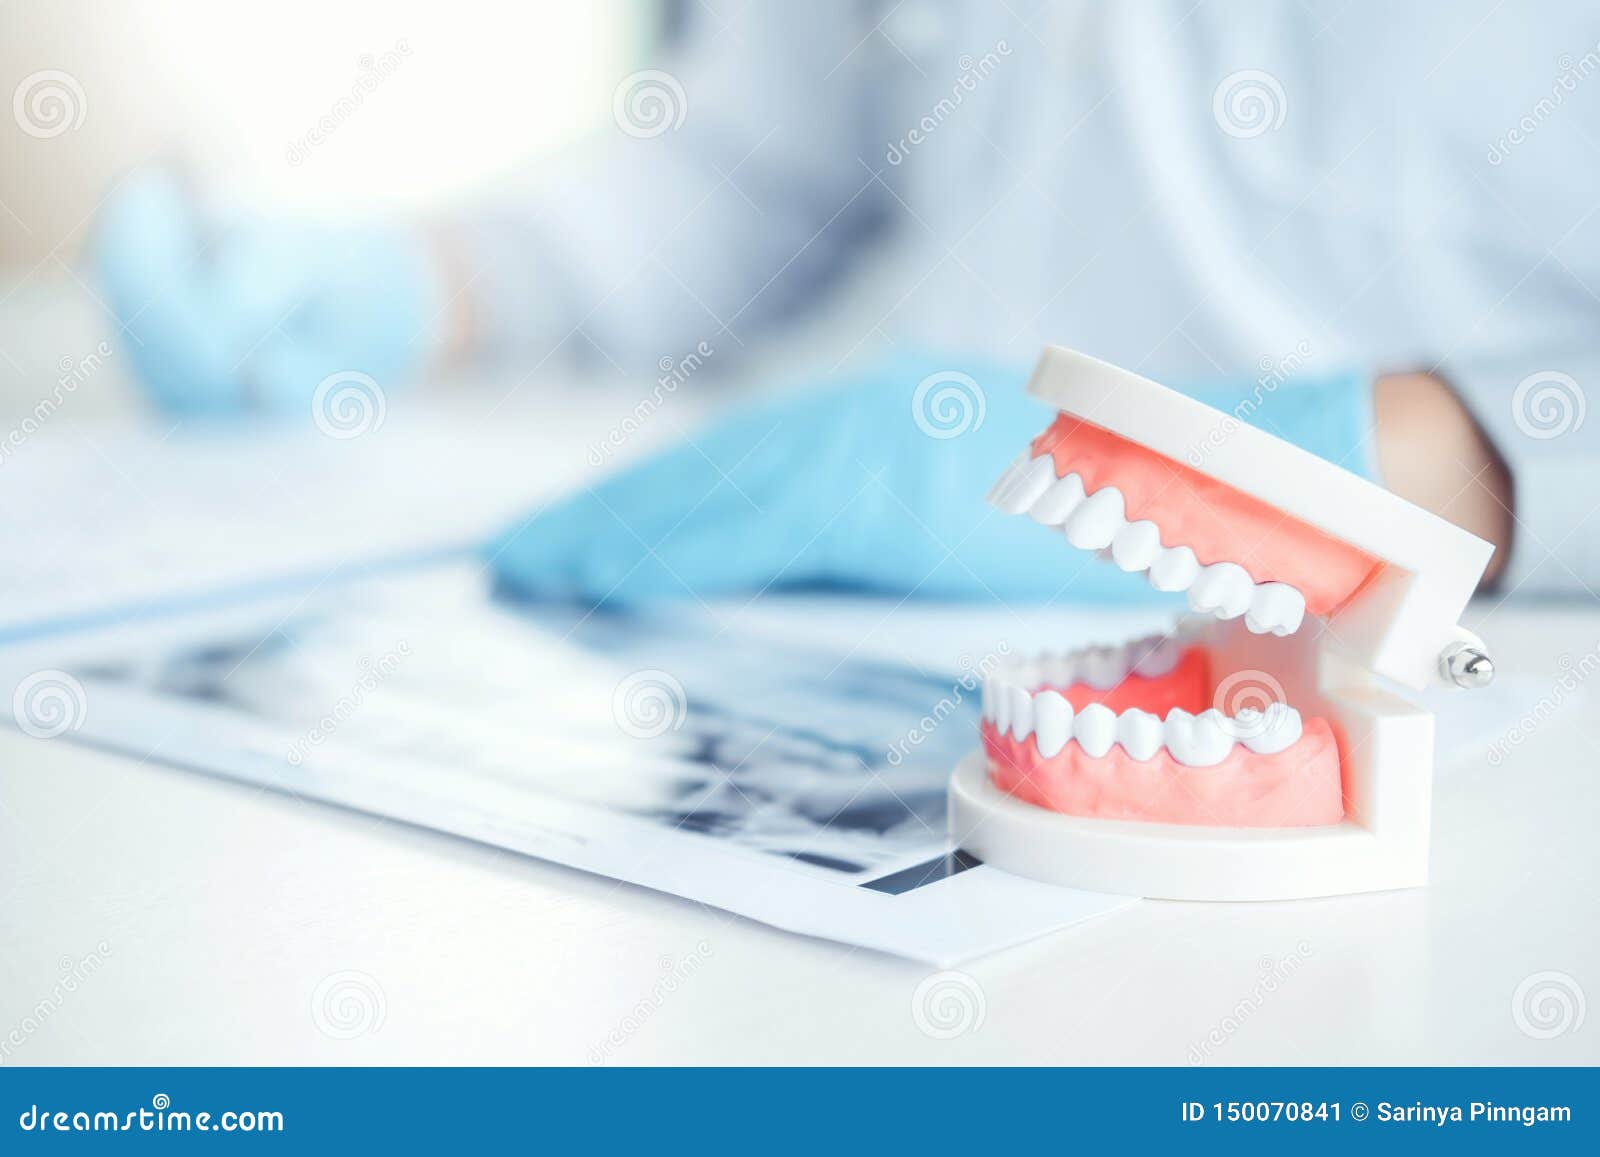 dentist with denture learning how to teeth at dentistÃâs office